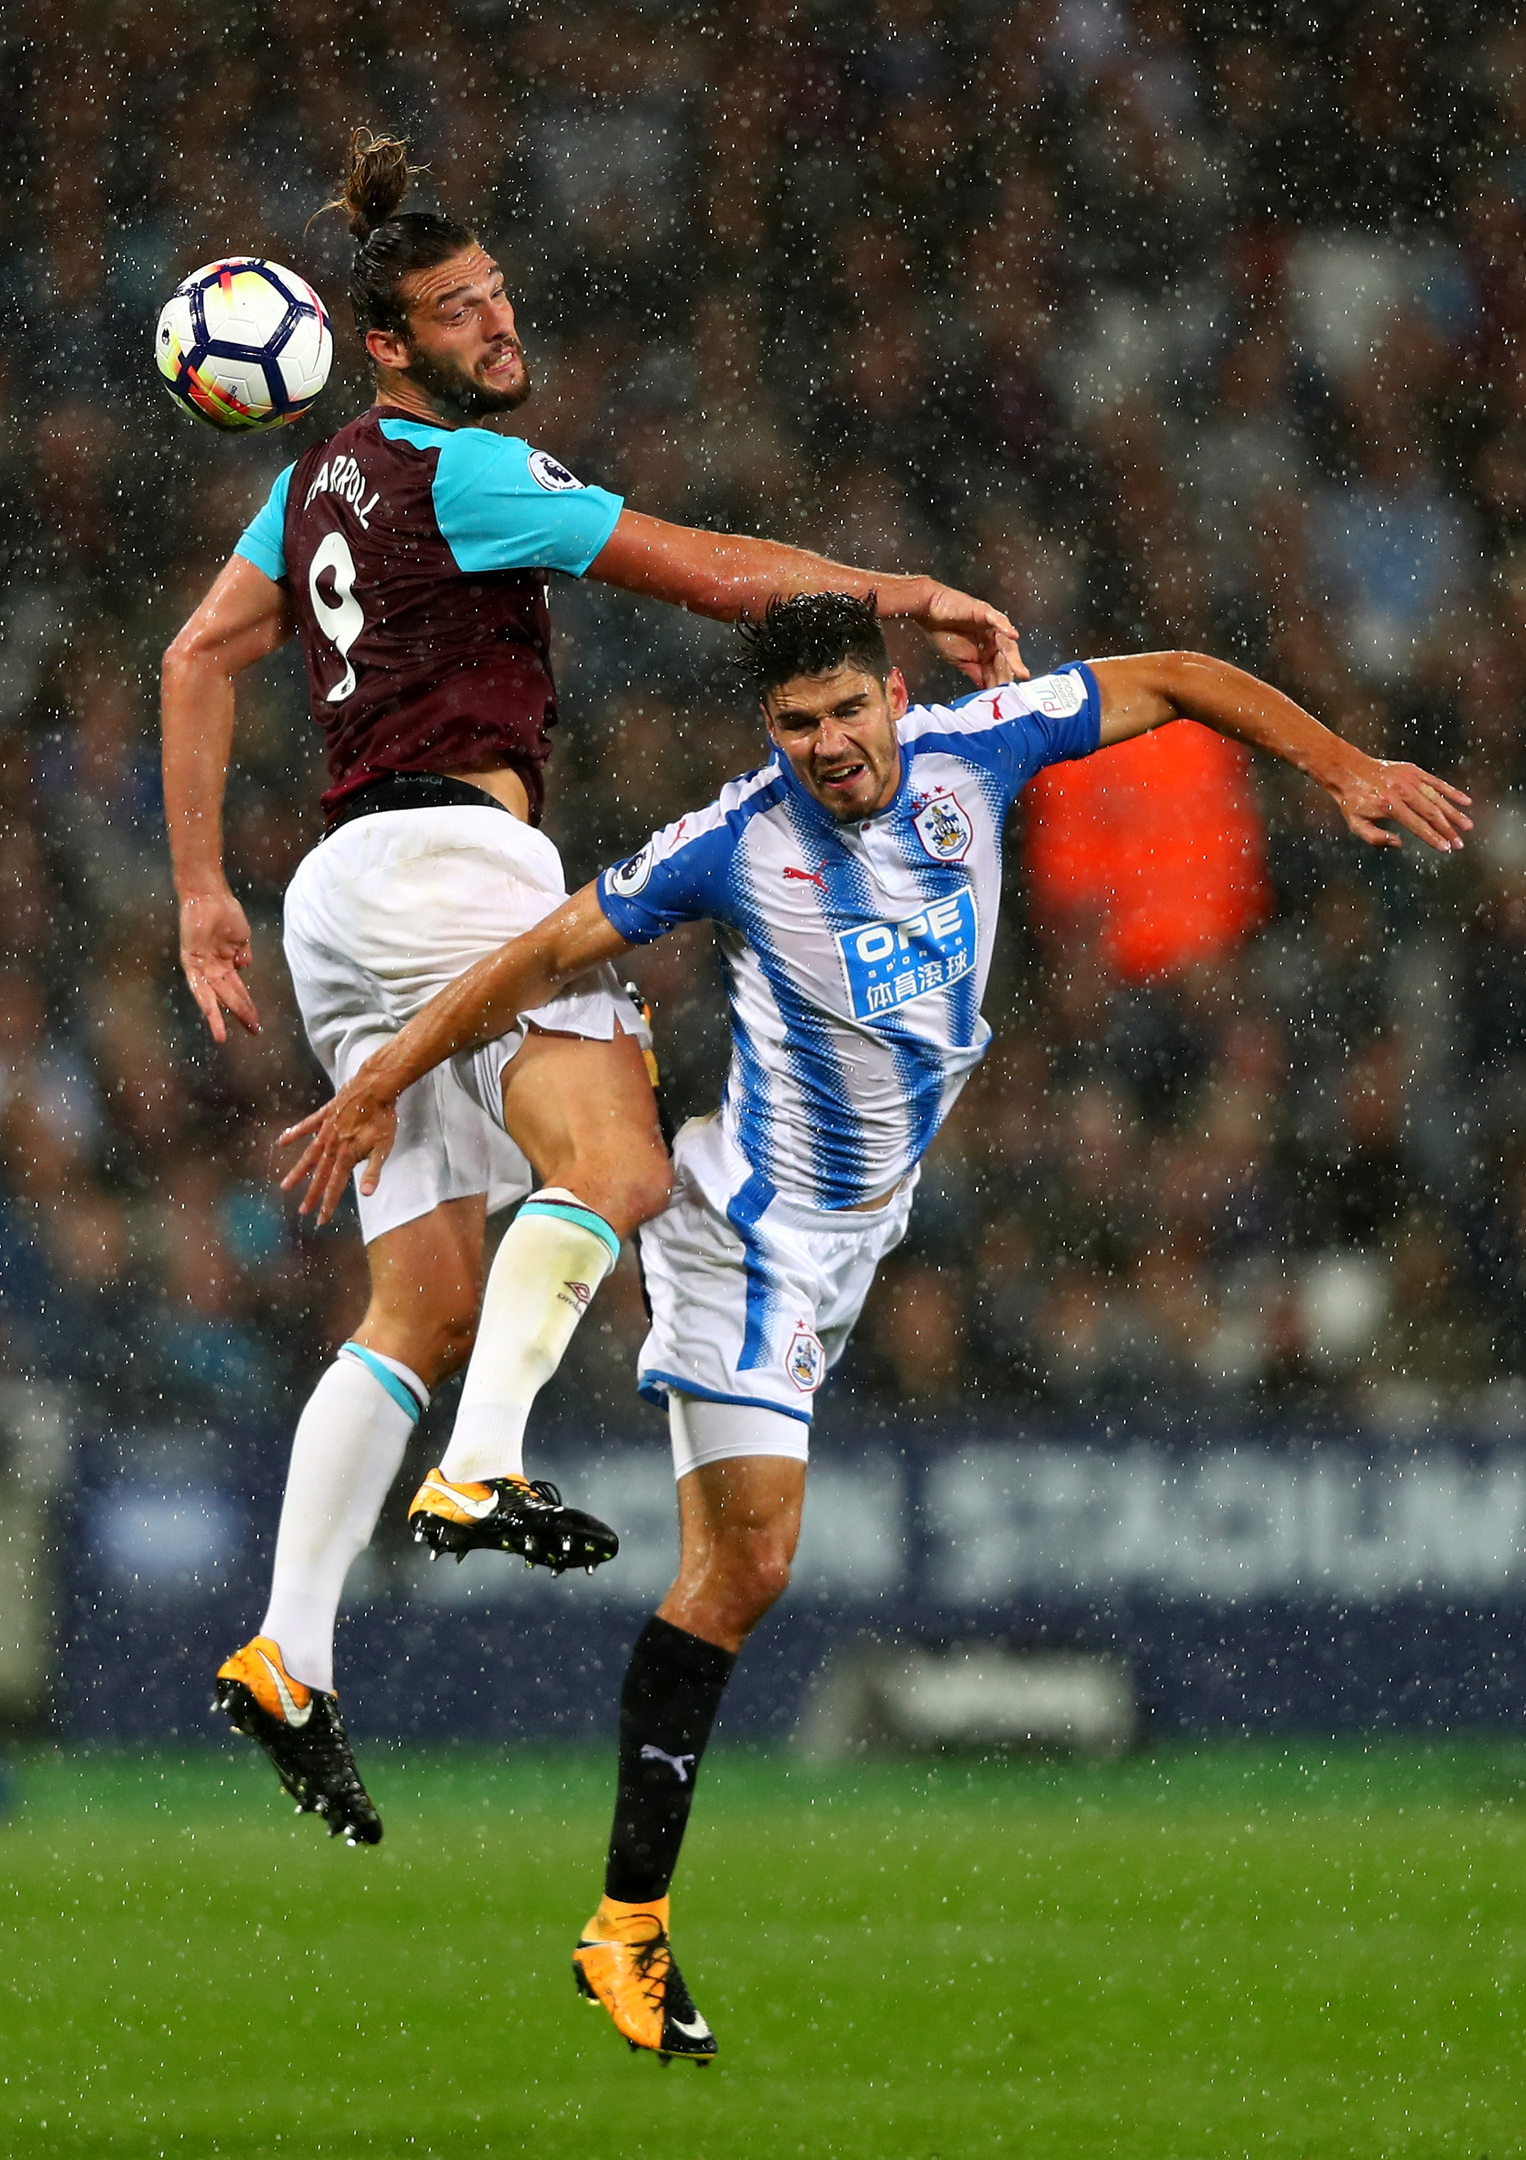 Andy Carroll in action (Clive Rose/Getty Images)